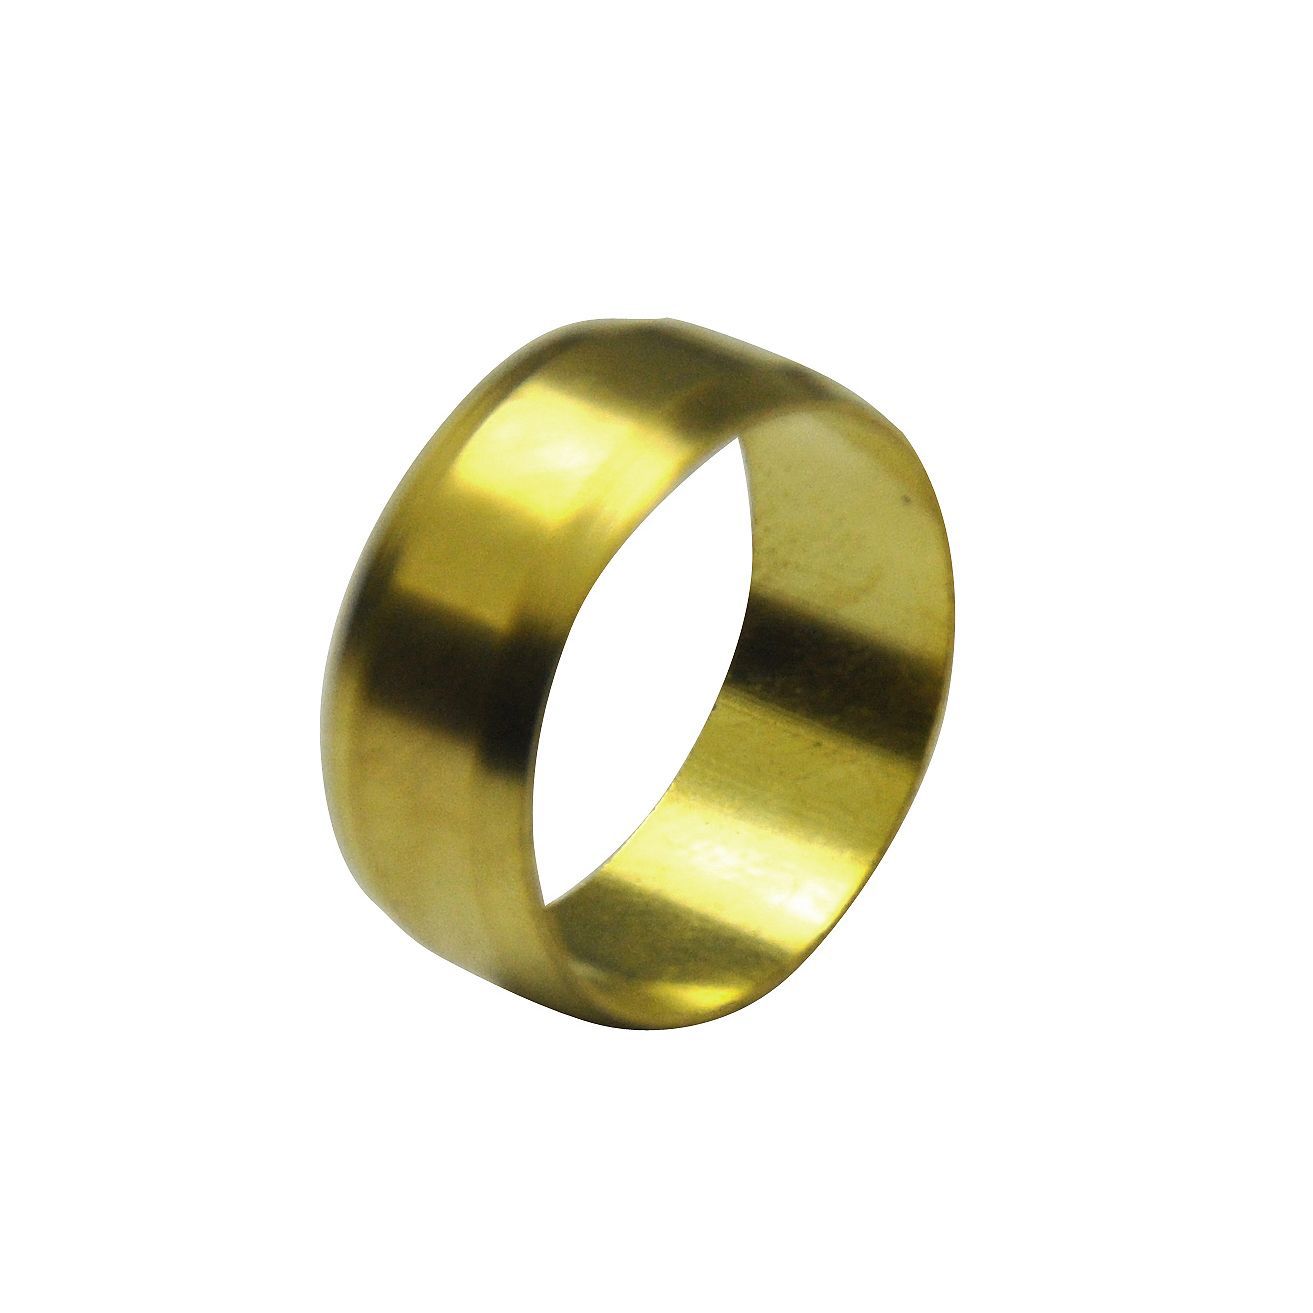 22mm Copper/Brass Olive (Pack of 10)